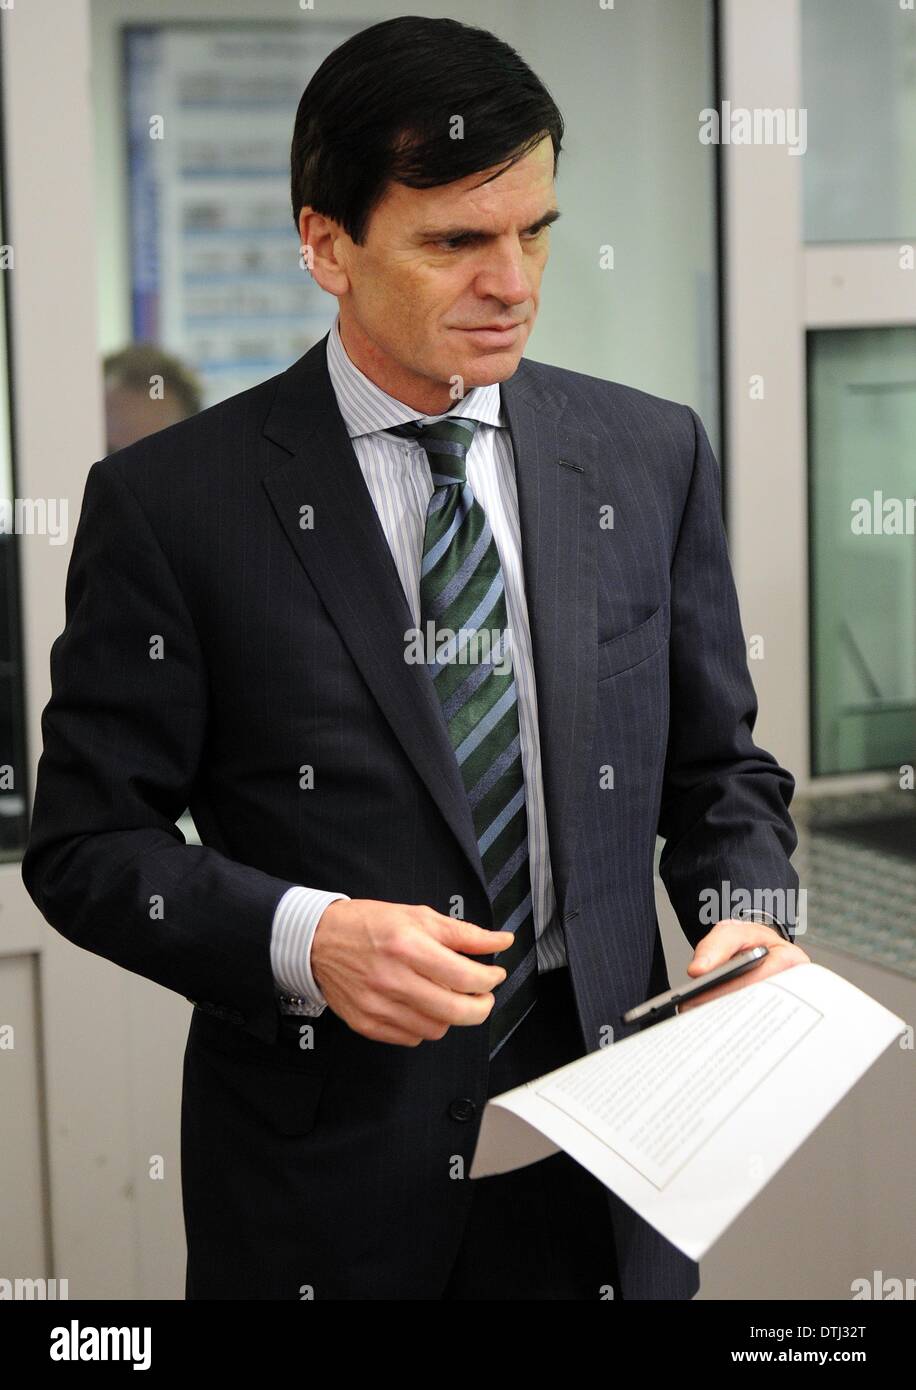 Cologne, Germany. 19th Feb, 2014. The head of investment bank Goldman Sachs in Germany, Alexander Dibelius, arrives at the court room of the district court in Cologne, Germany, 19 February 2014. Dibelius is a witness in the Sal. Oppenheim trial. Photo: OLIVER BERG/dpa/Alamy Live News Stock Photo